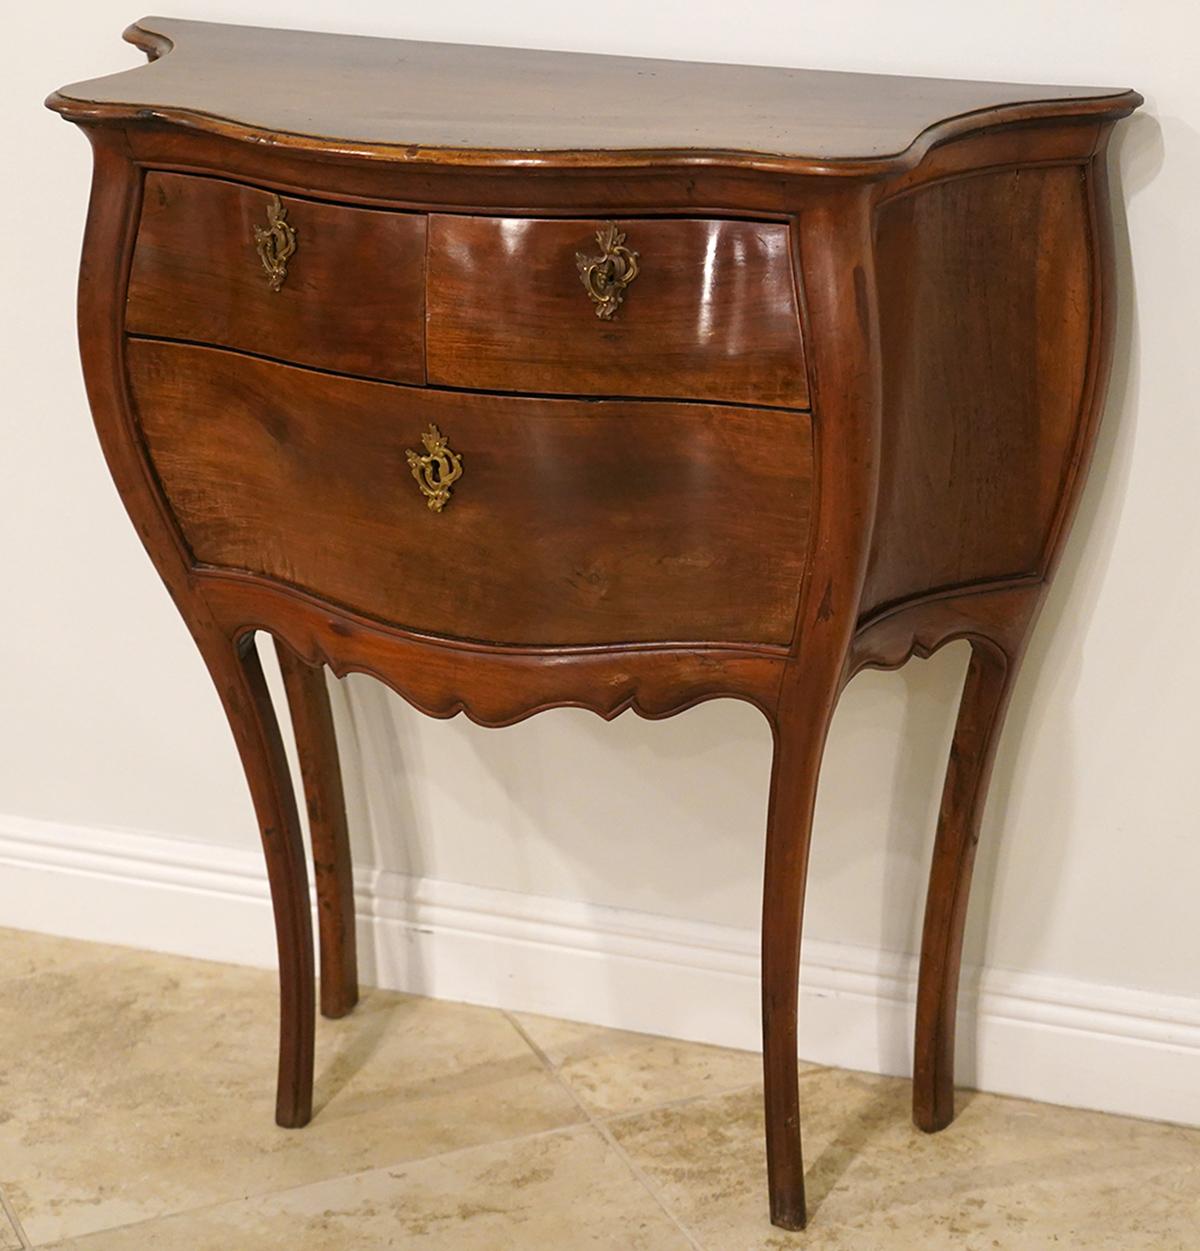 Strikingly elegant lines characterizes this lovely Italian transitional rococo bombe commode. It features a serpentine shaped top following the bombe design above two short drawers and one long mounted with rococo foliate bronze escutcheons. The